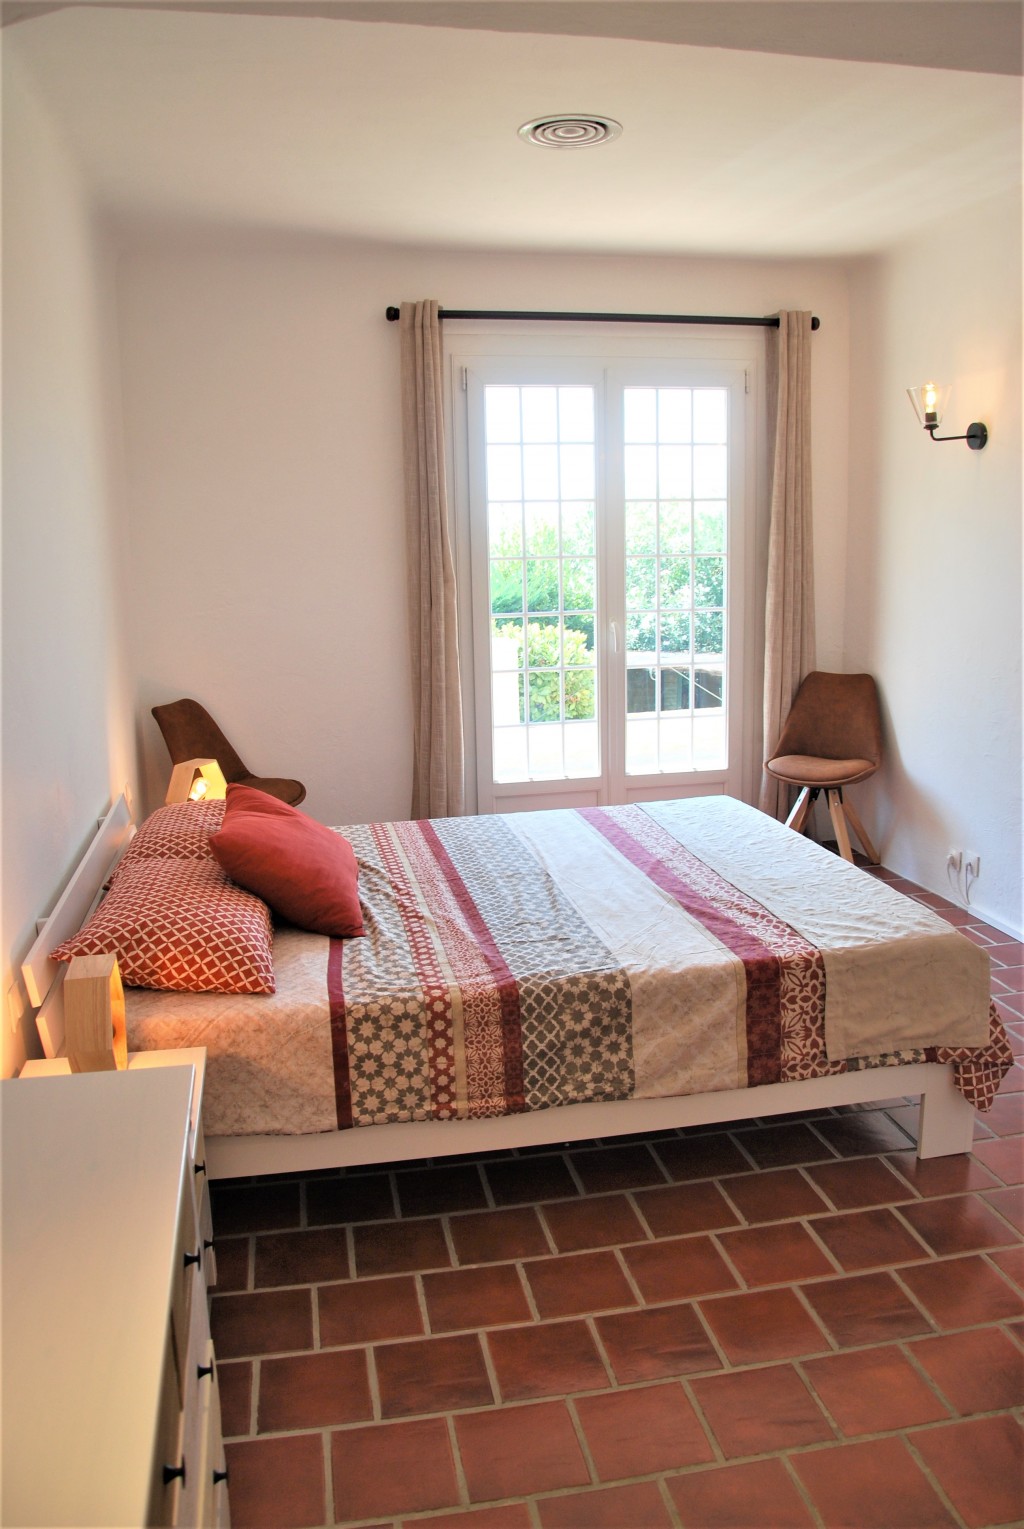 Images for Long term rental, Mougins, Alpes Maritime EAID: BID:homefromhome